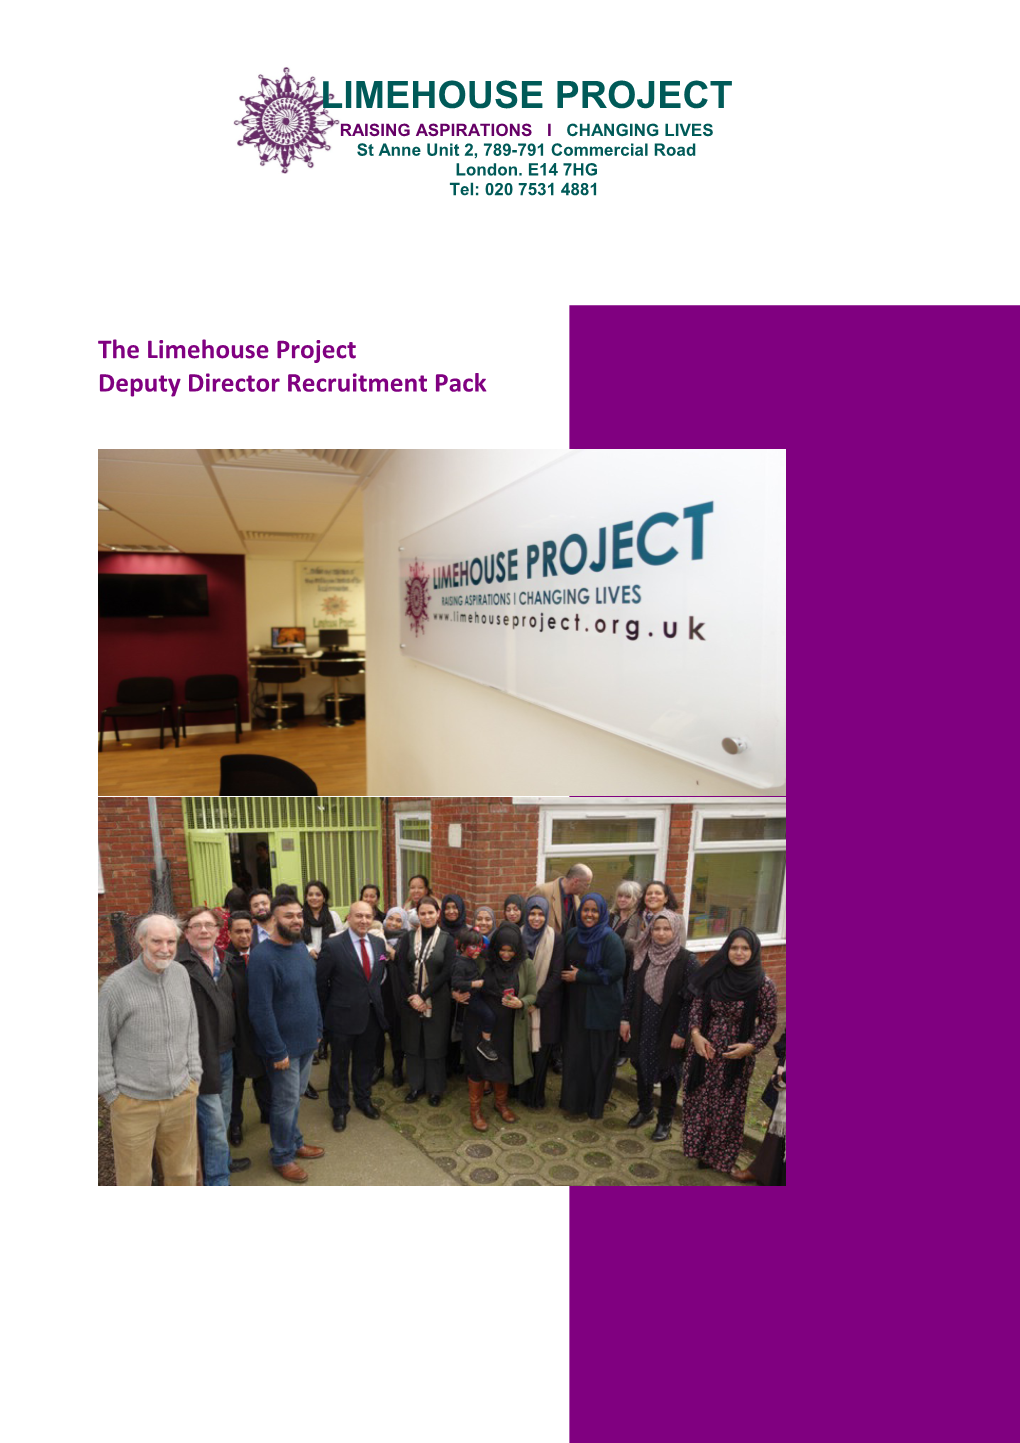 The Limehouse Project Deputy Director Recruitment Pack